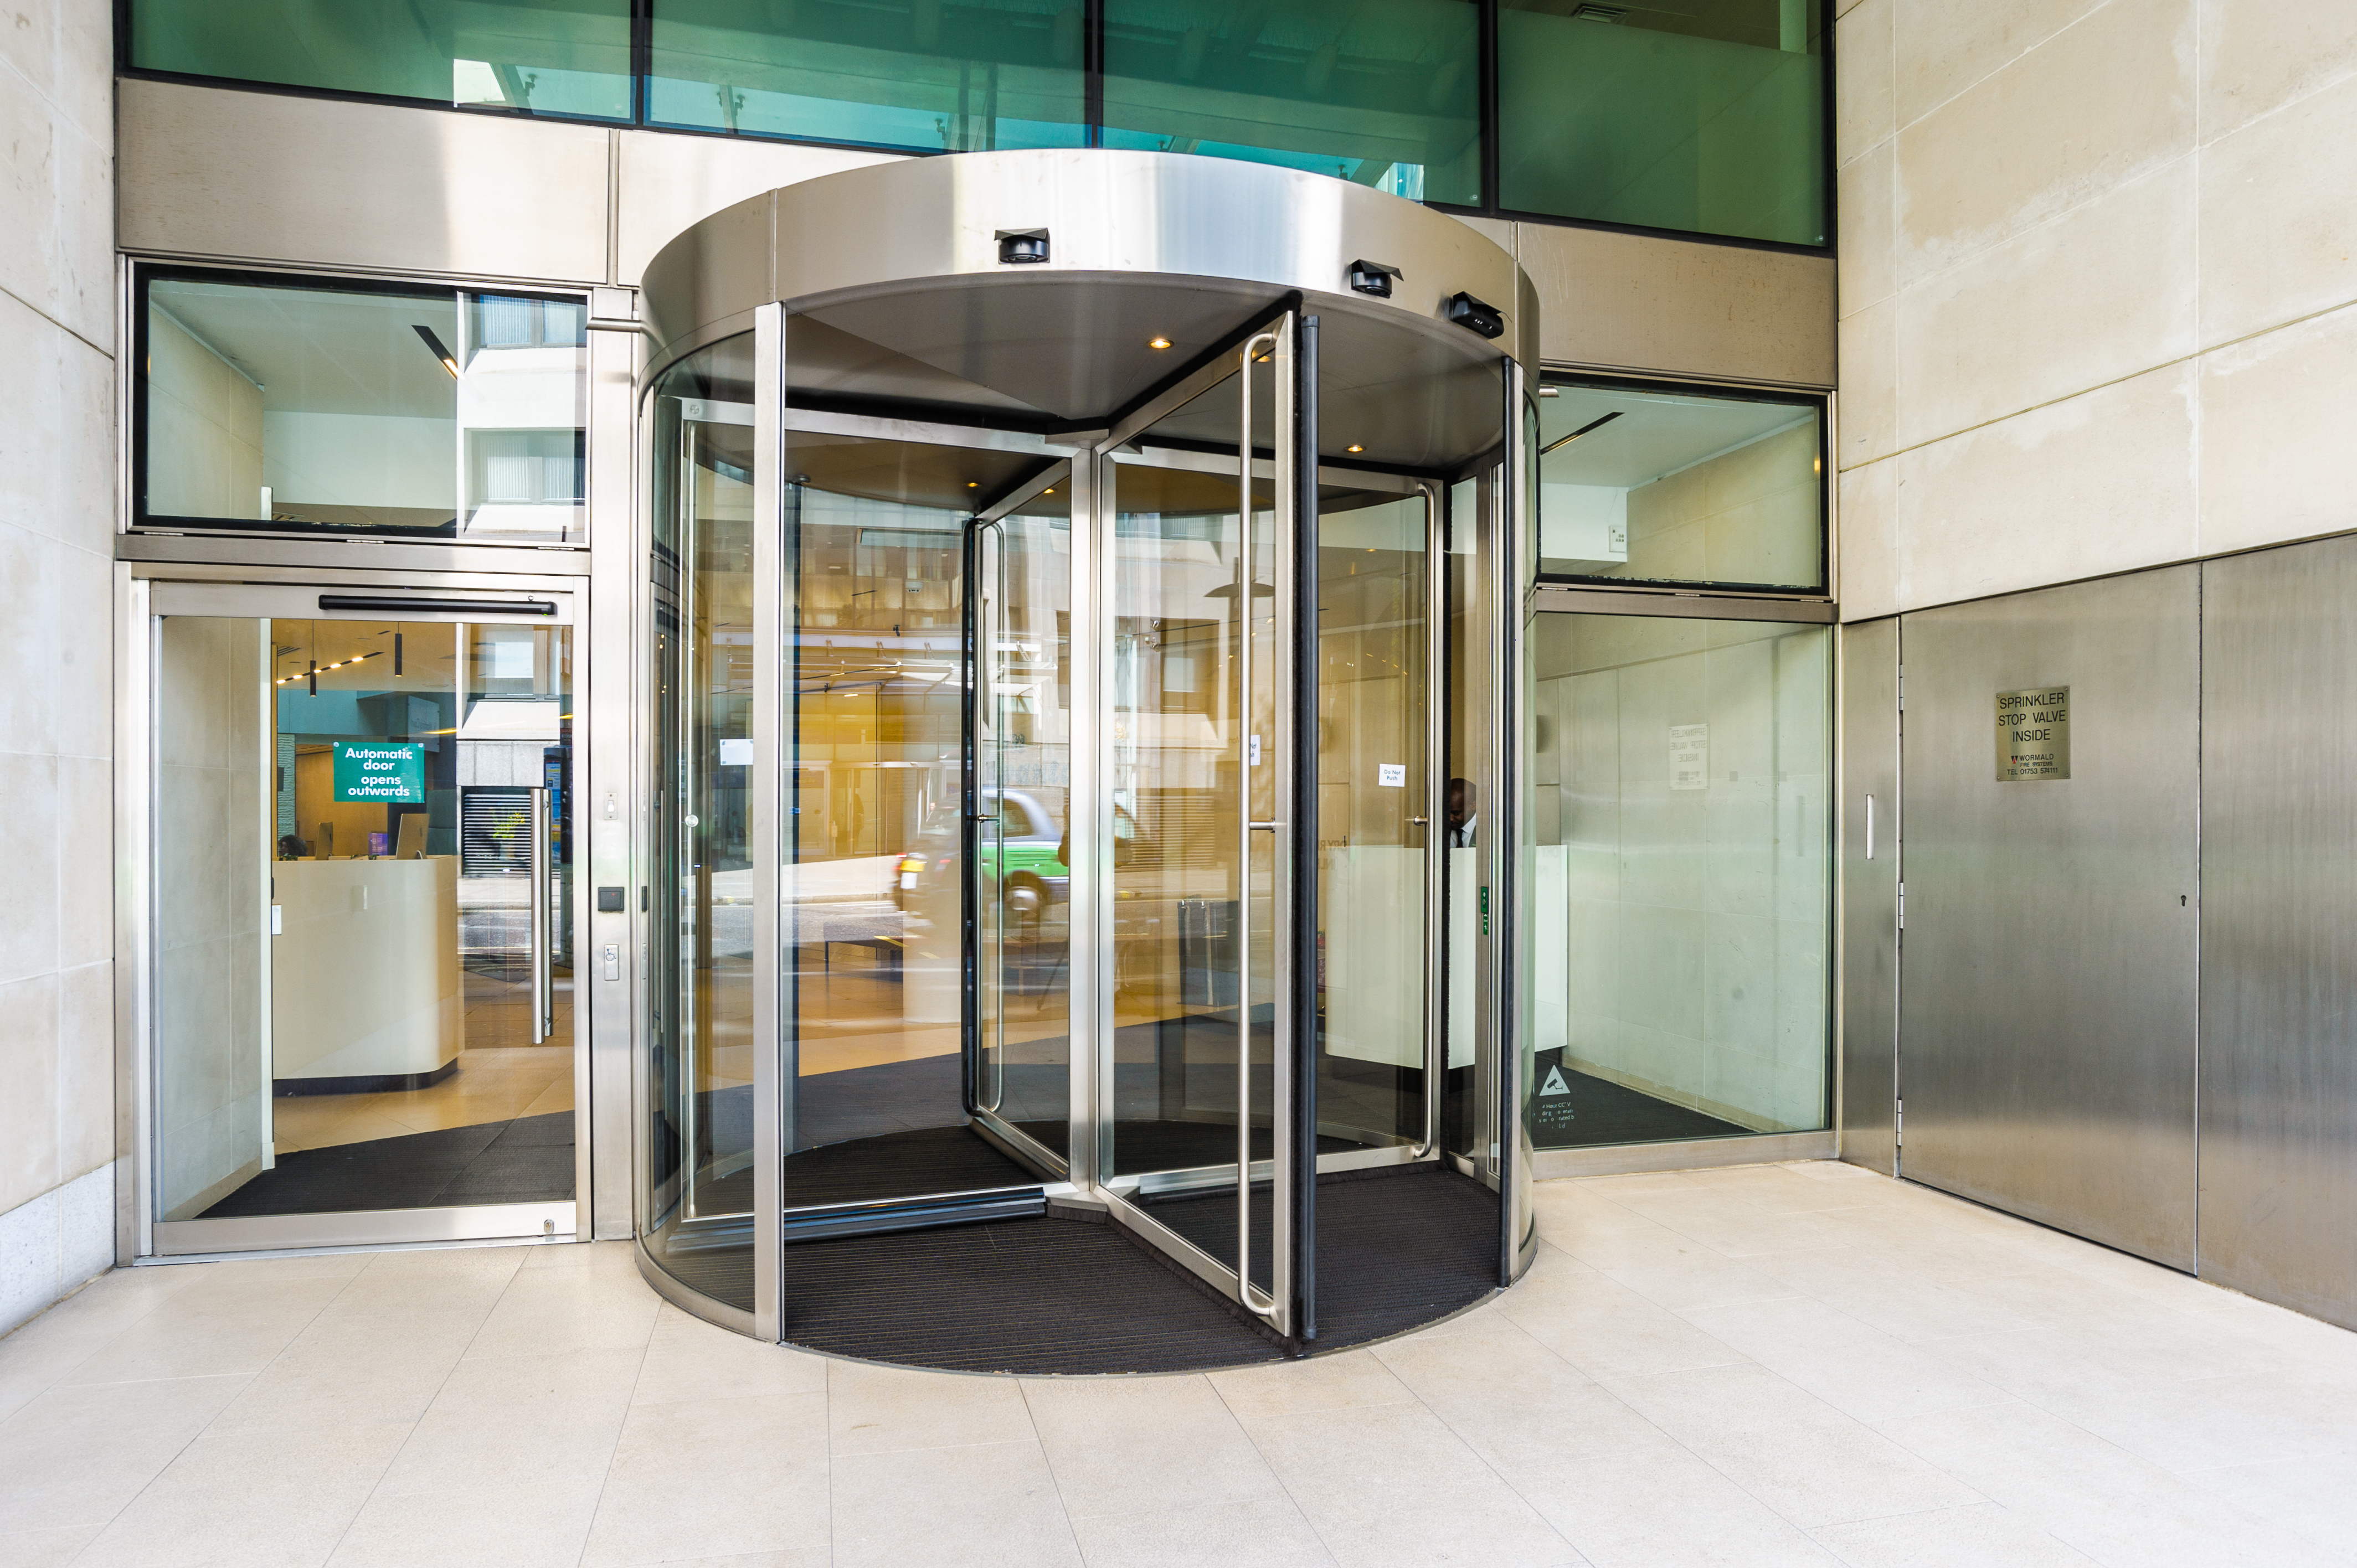 Automatic Doors - Automatic Revolving Door by record